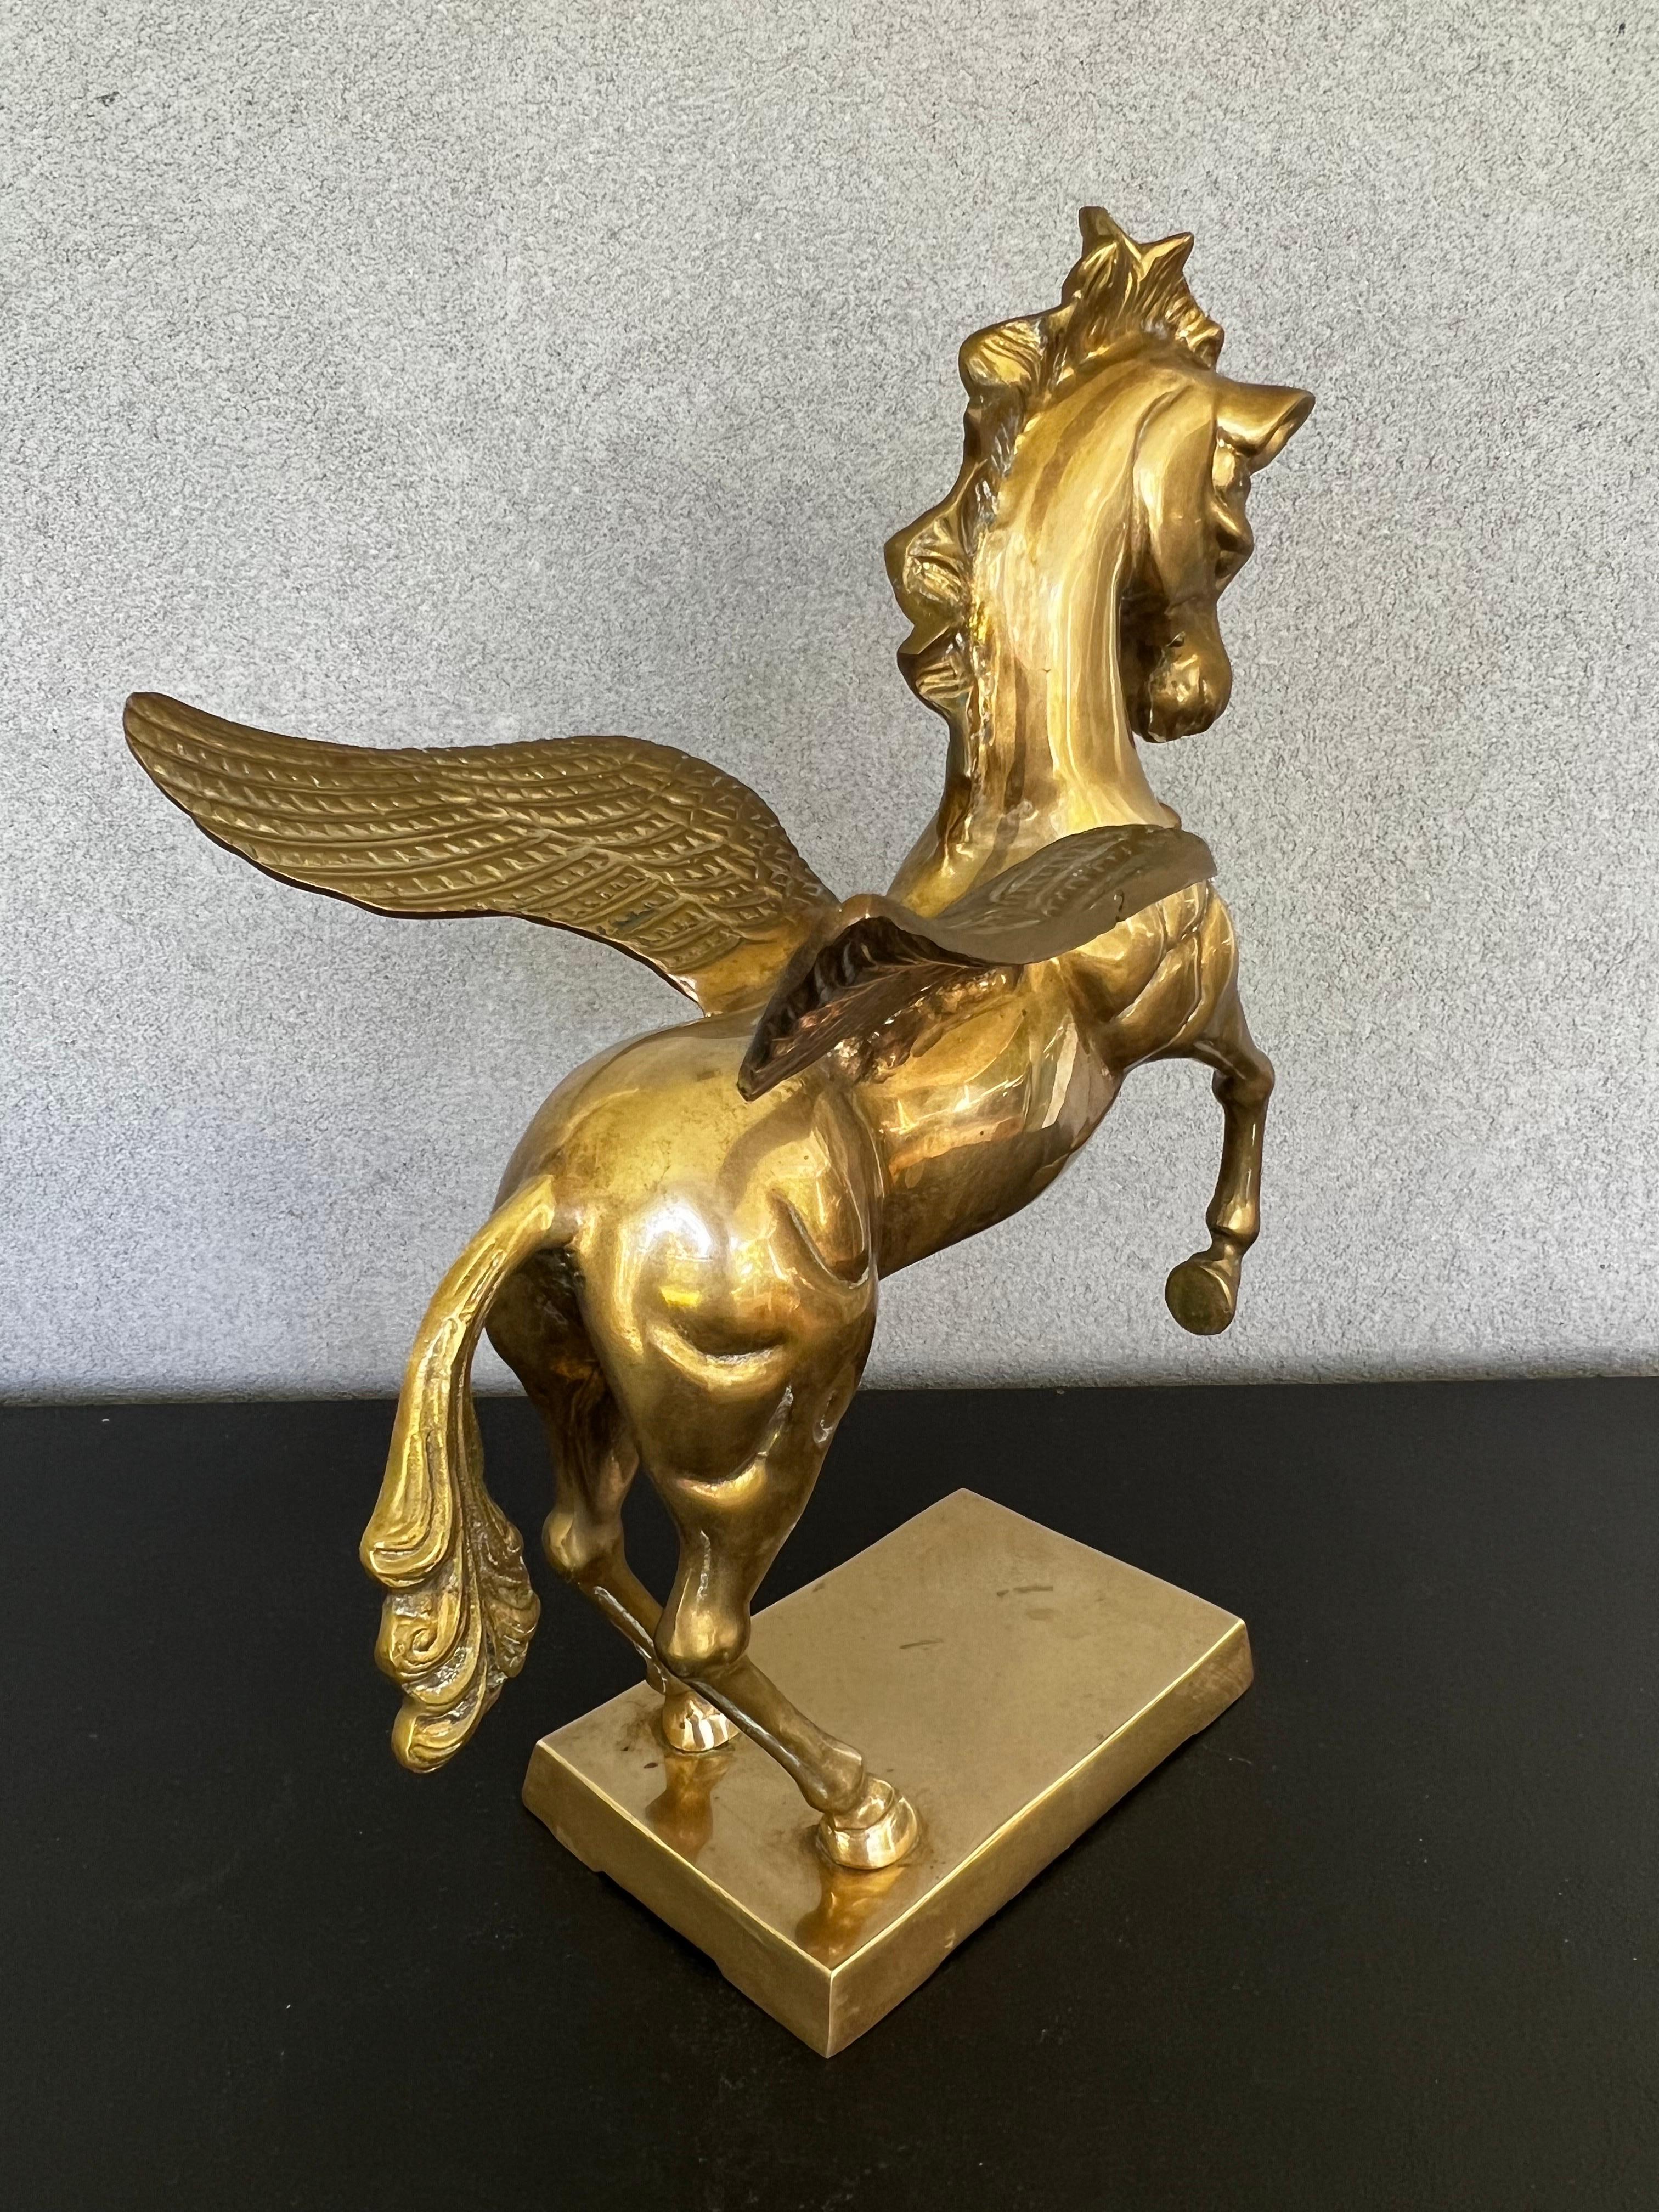 Heavy, Bronze, standing pegasus horse with wings on a rectangular brass base. Nice details on wings and horse. Pegasus was an immortal winged horse according to Greek mythology. Perfect for your collection. Very good condition. Weights over 15